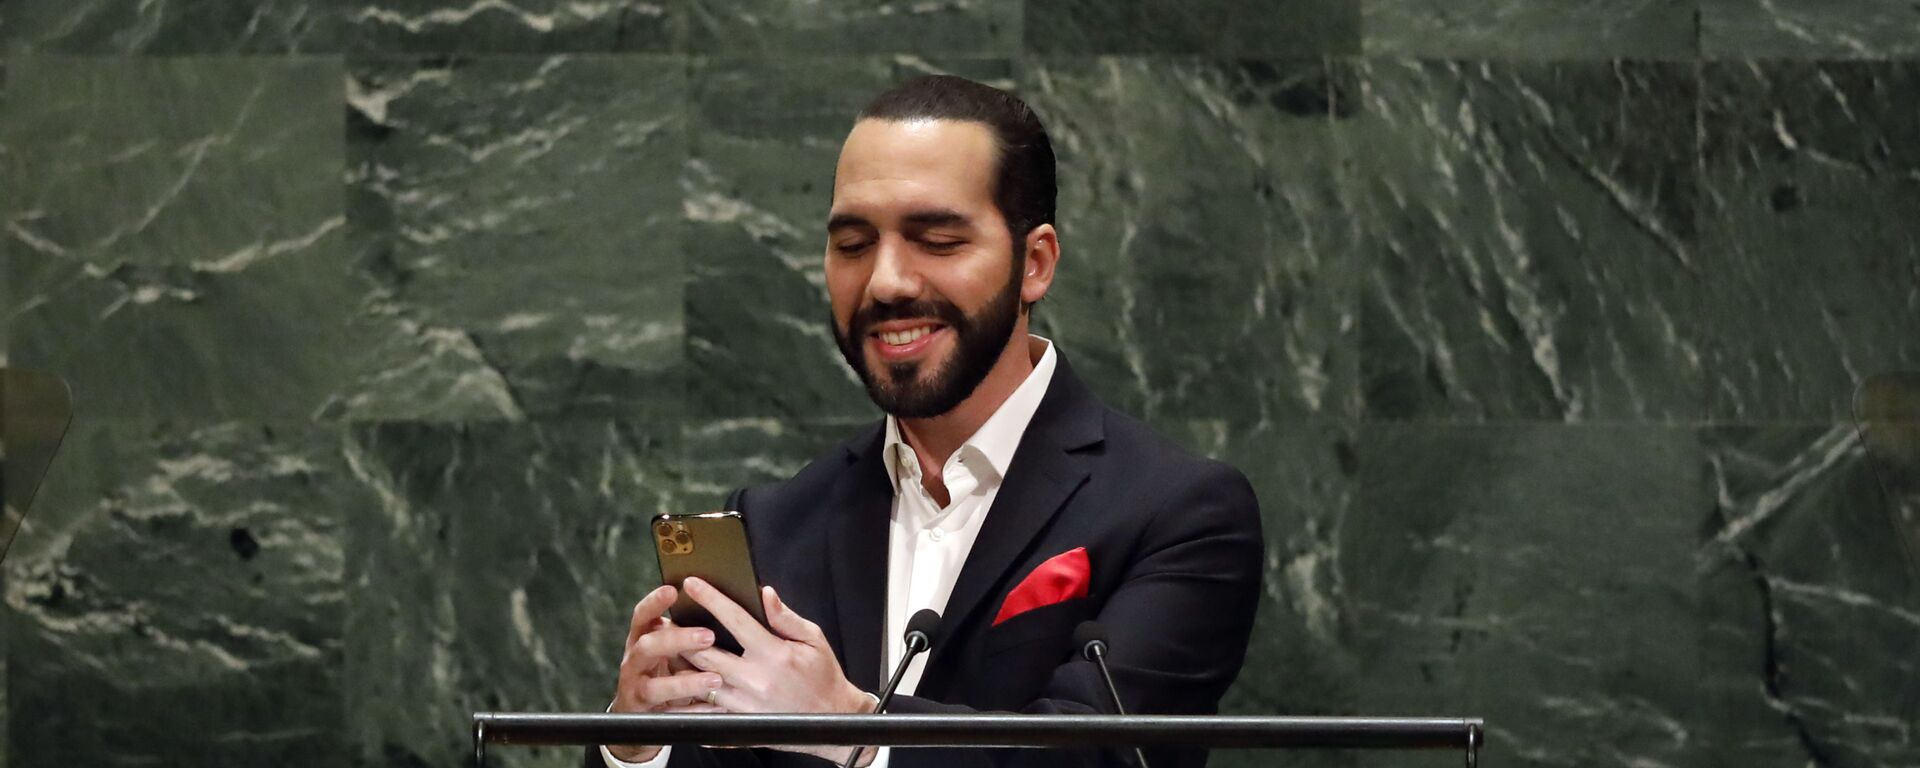 El Salvador's President Nayib Bukele takes a selfie portrait during his addresses to the 74th session of the United Nations General Assembly, Thursday, Sept. 26, 2019.  - Sputnik International, 1920, 05.04.2023